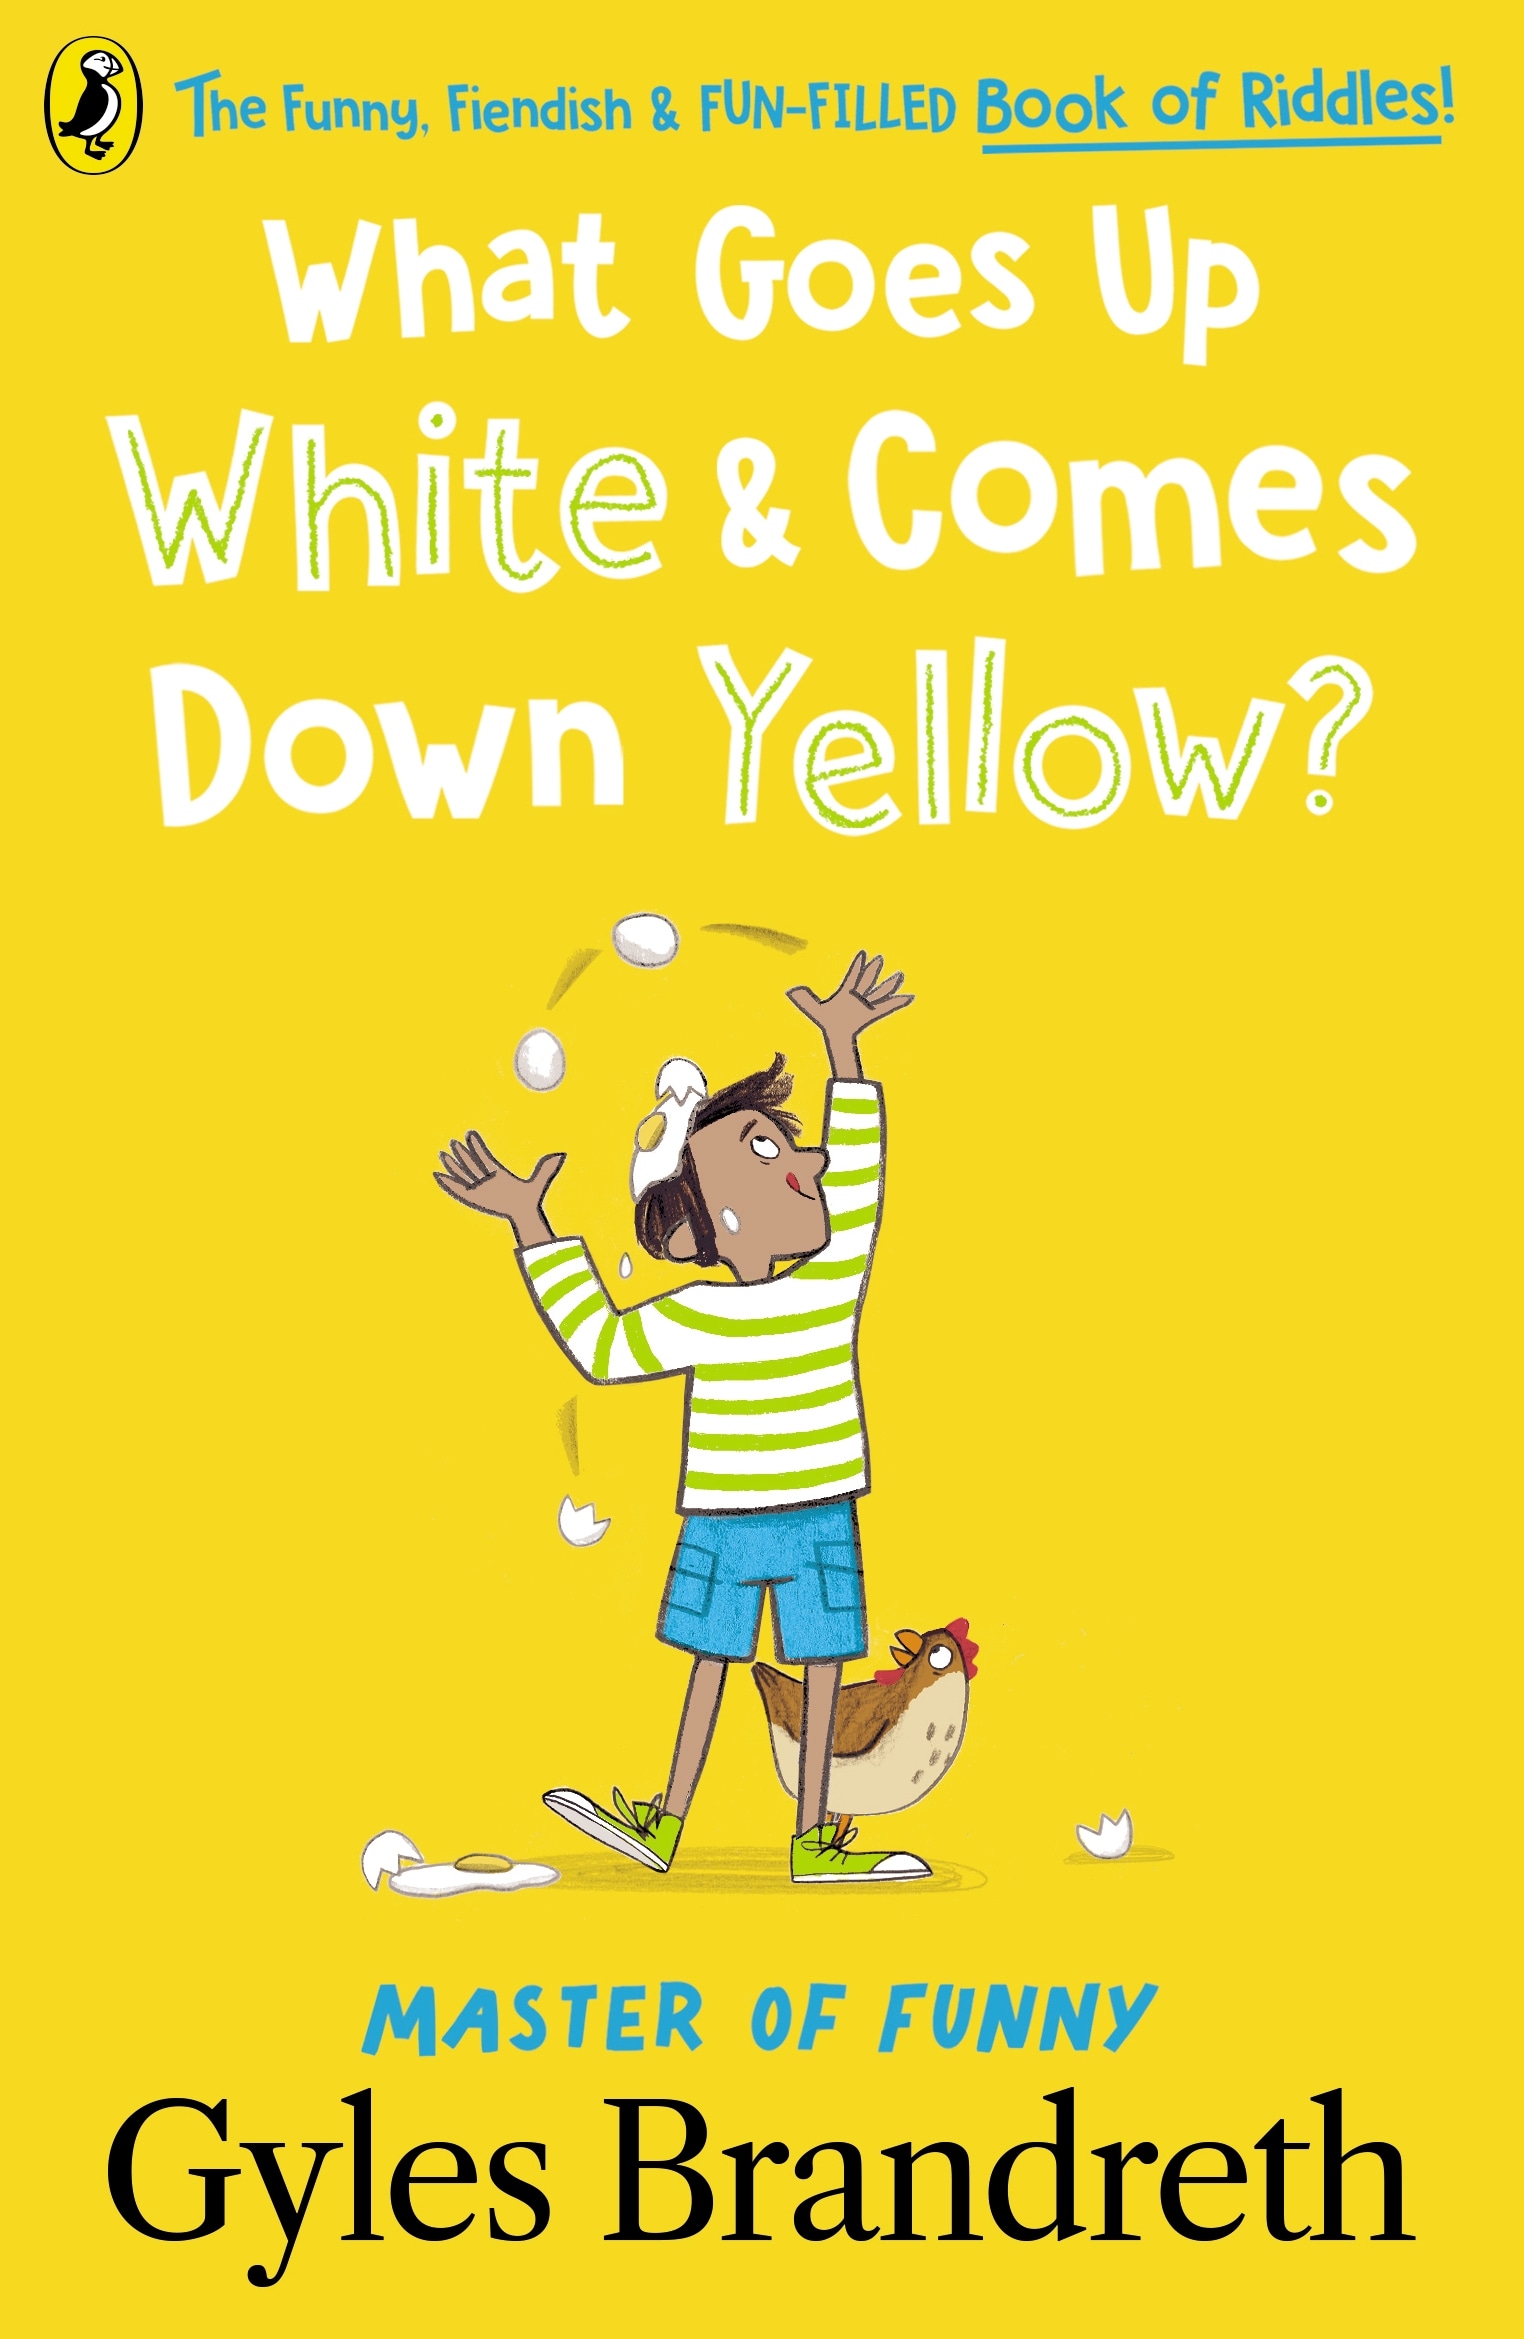 Book “What Goes Up White and Comes Down Yellow?” by Gyles Brandreth — February 9, 2023